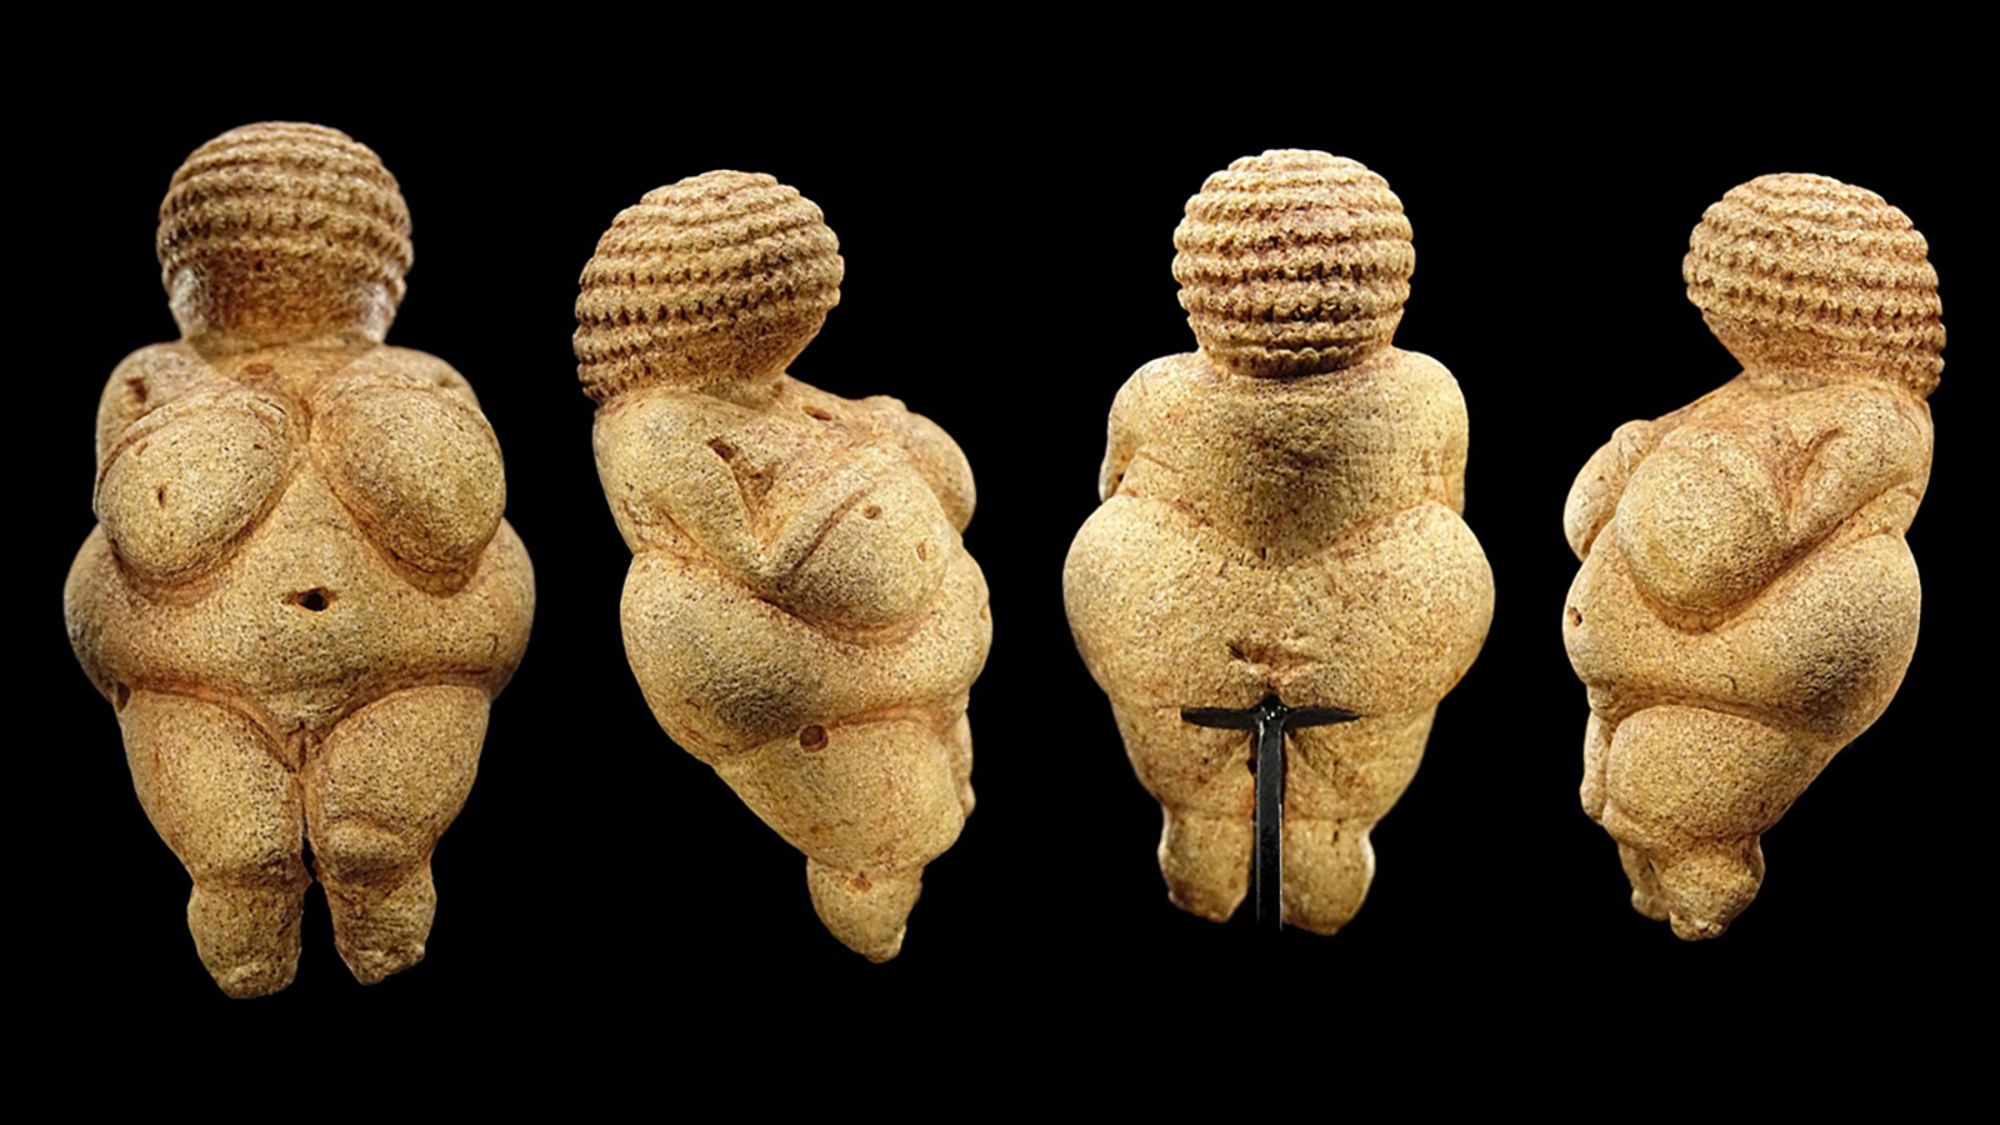 Venus figurines may be a symbol of survival, not sex, study suggests